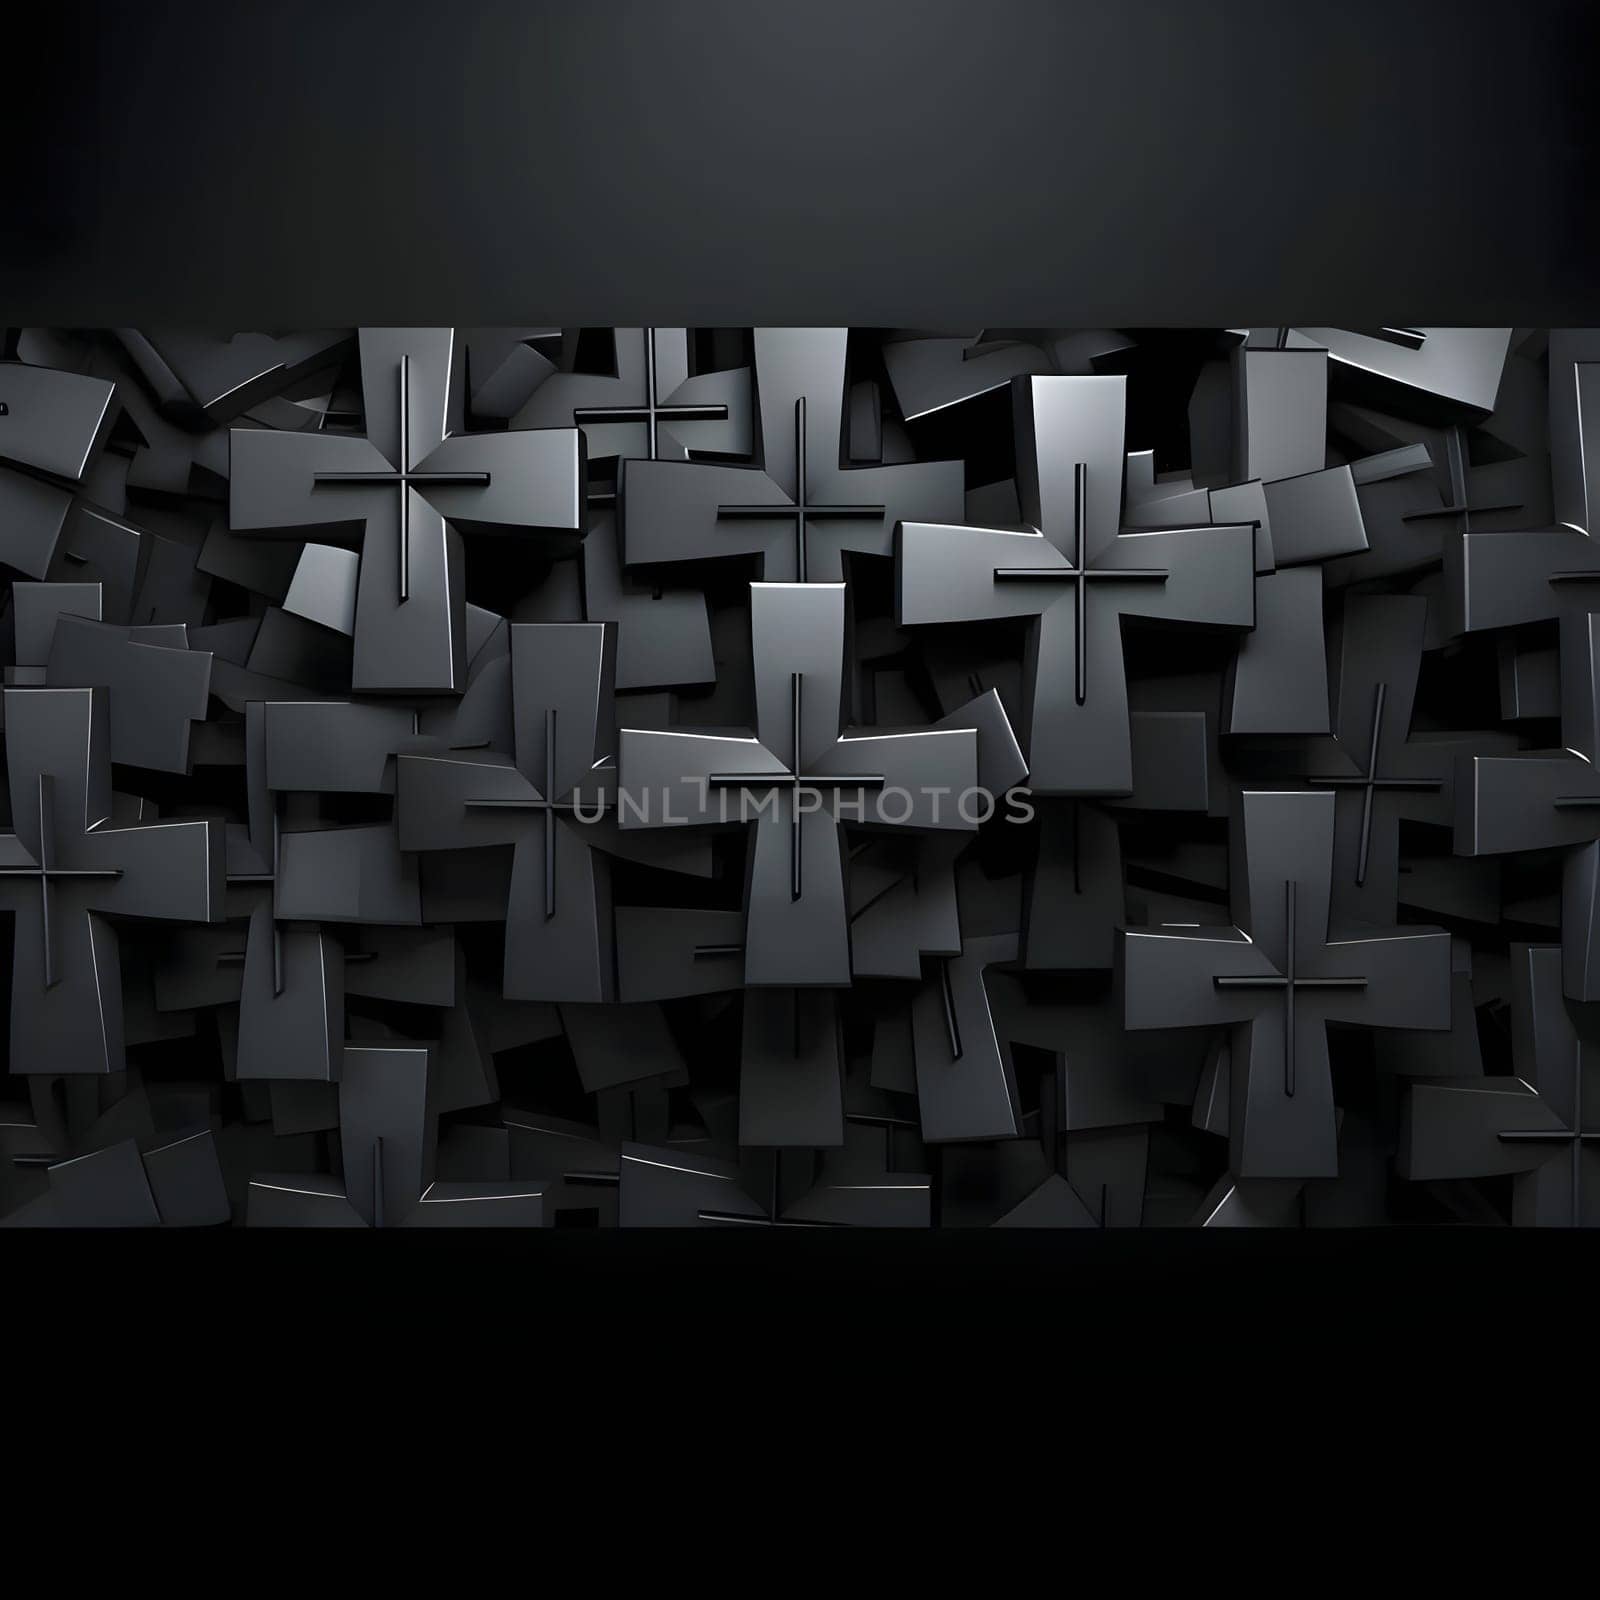 Patterns and banners backgrounds: Abstract background made of black cubes. 3d render. Computer digital drawing.